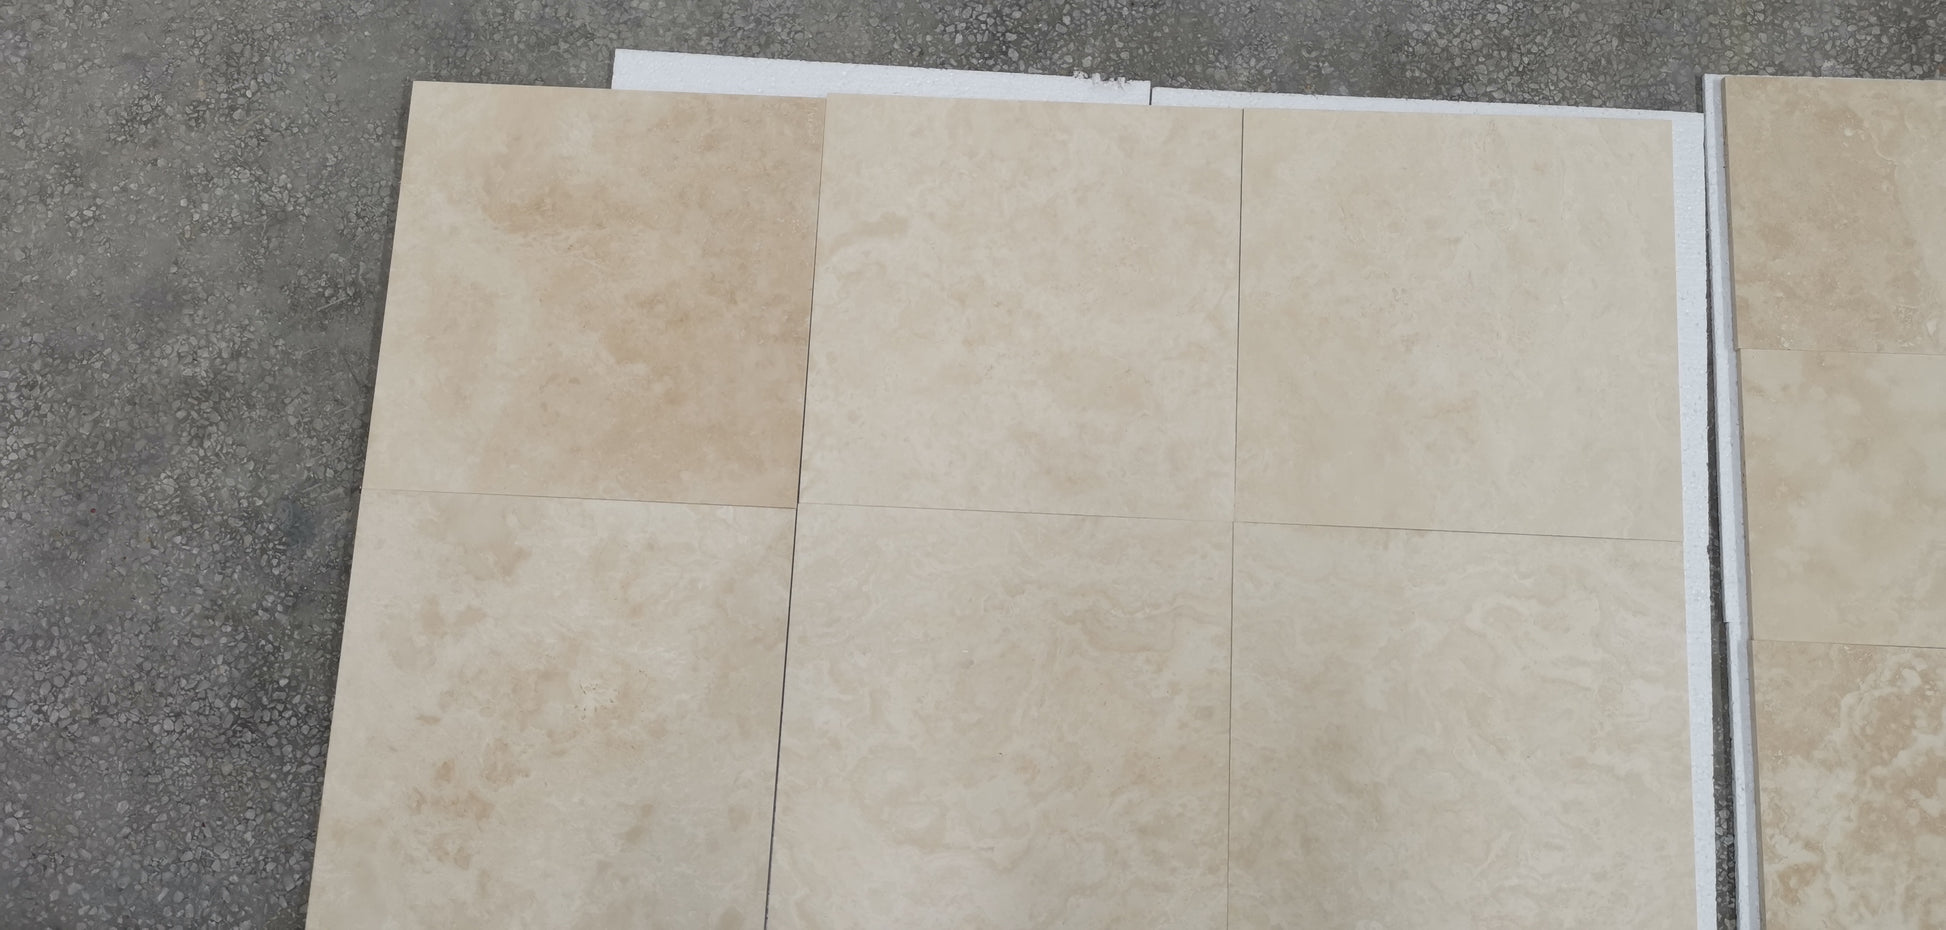 Ivory Travertine Filled & Honed Wall and Floor Tile 6x6"